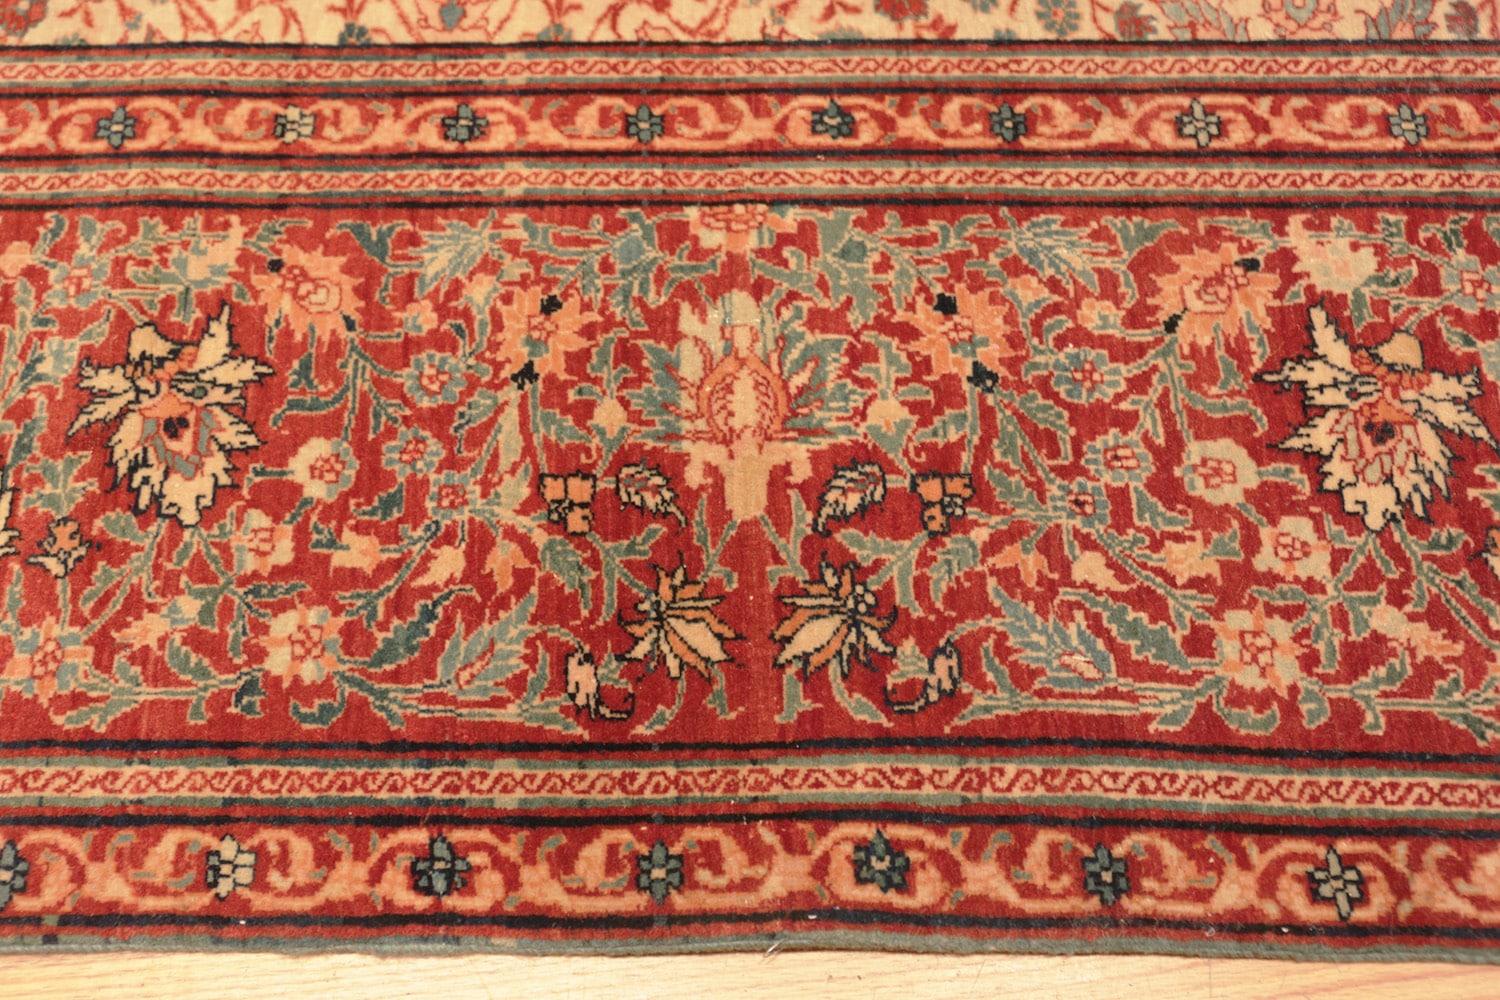 Antique Tabriz Carpet, Country of Origin: Persia, Circa 1900. Size: 9 ft 6 in x 11 ft 6 in (2.9 m x 3.51 m)

Bold, complex, and stunning, this magnificent Persian carpet boasts rich color, breathtaking intricacy, and flawless artistry. This